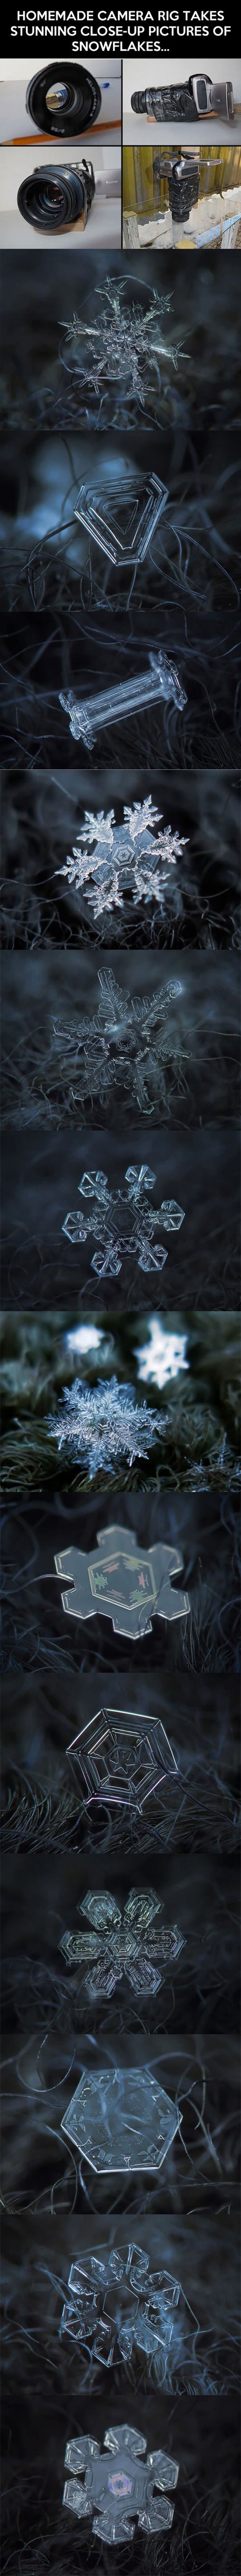 Captured Snowflakes funny picture